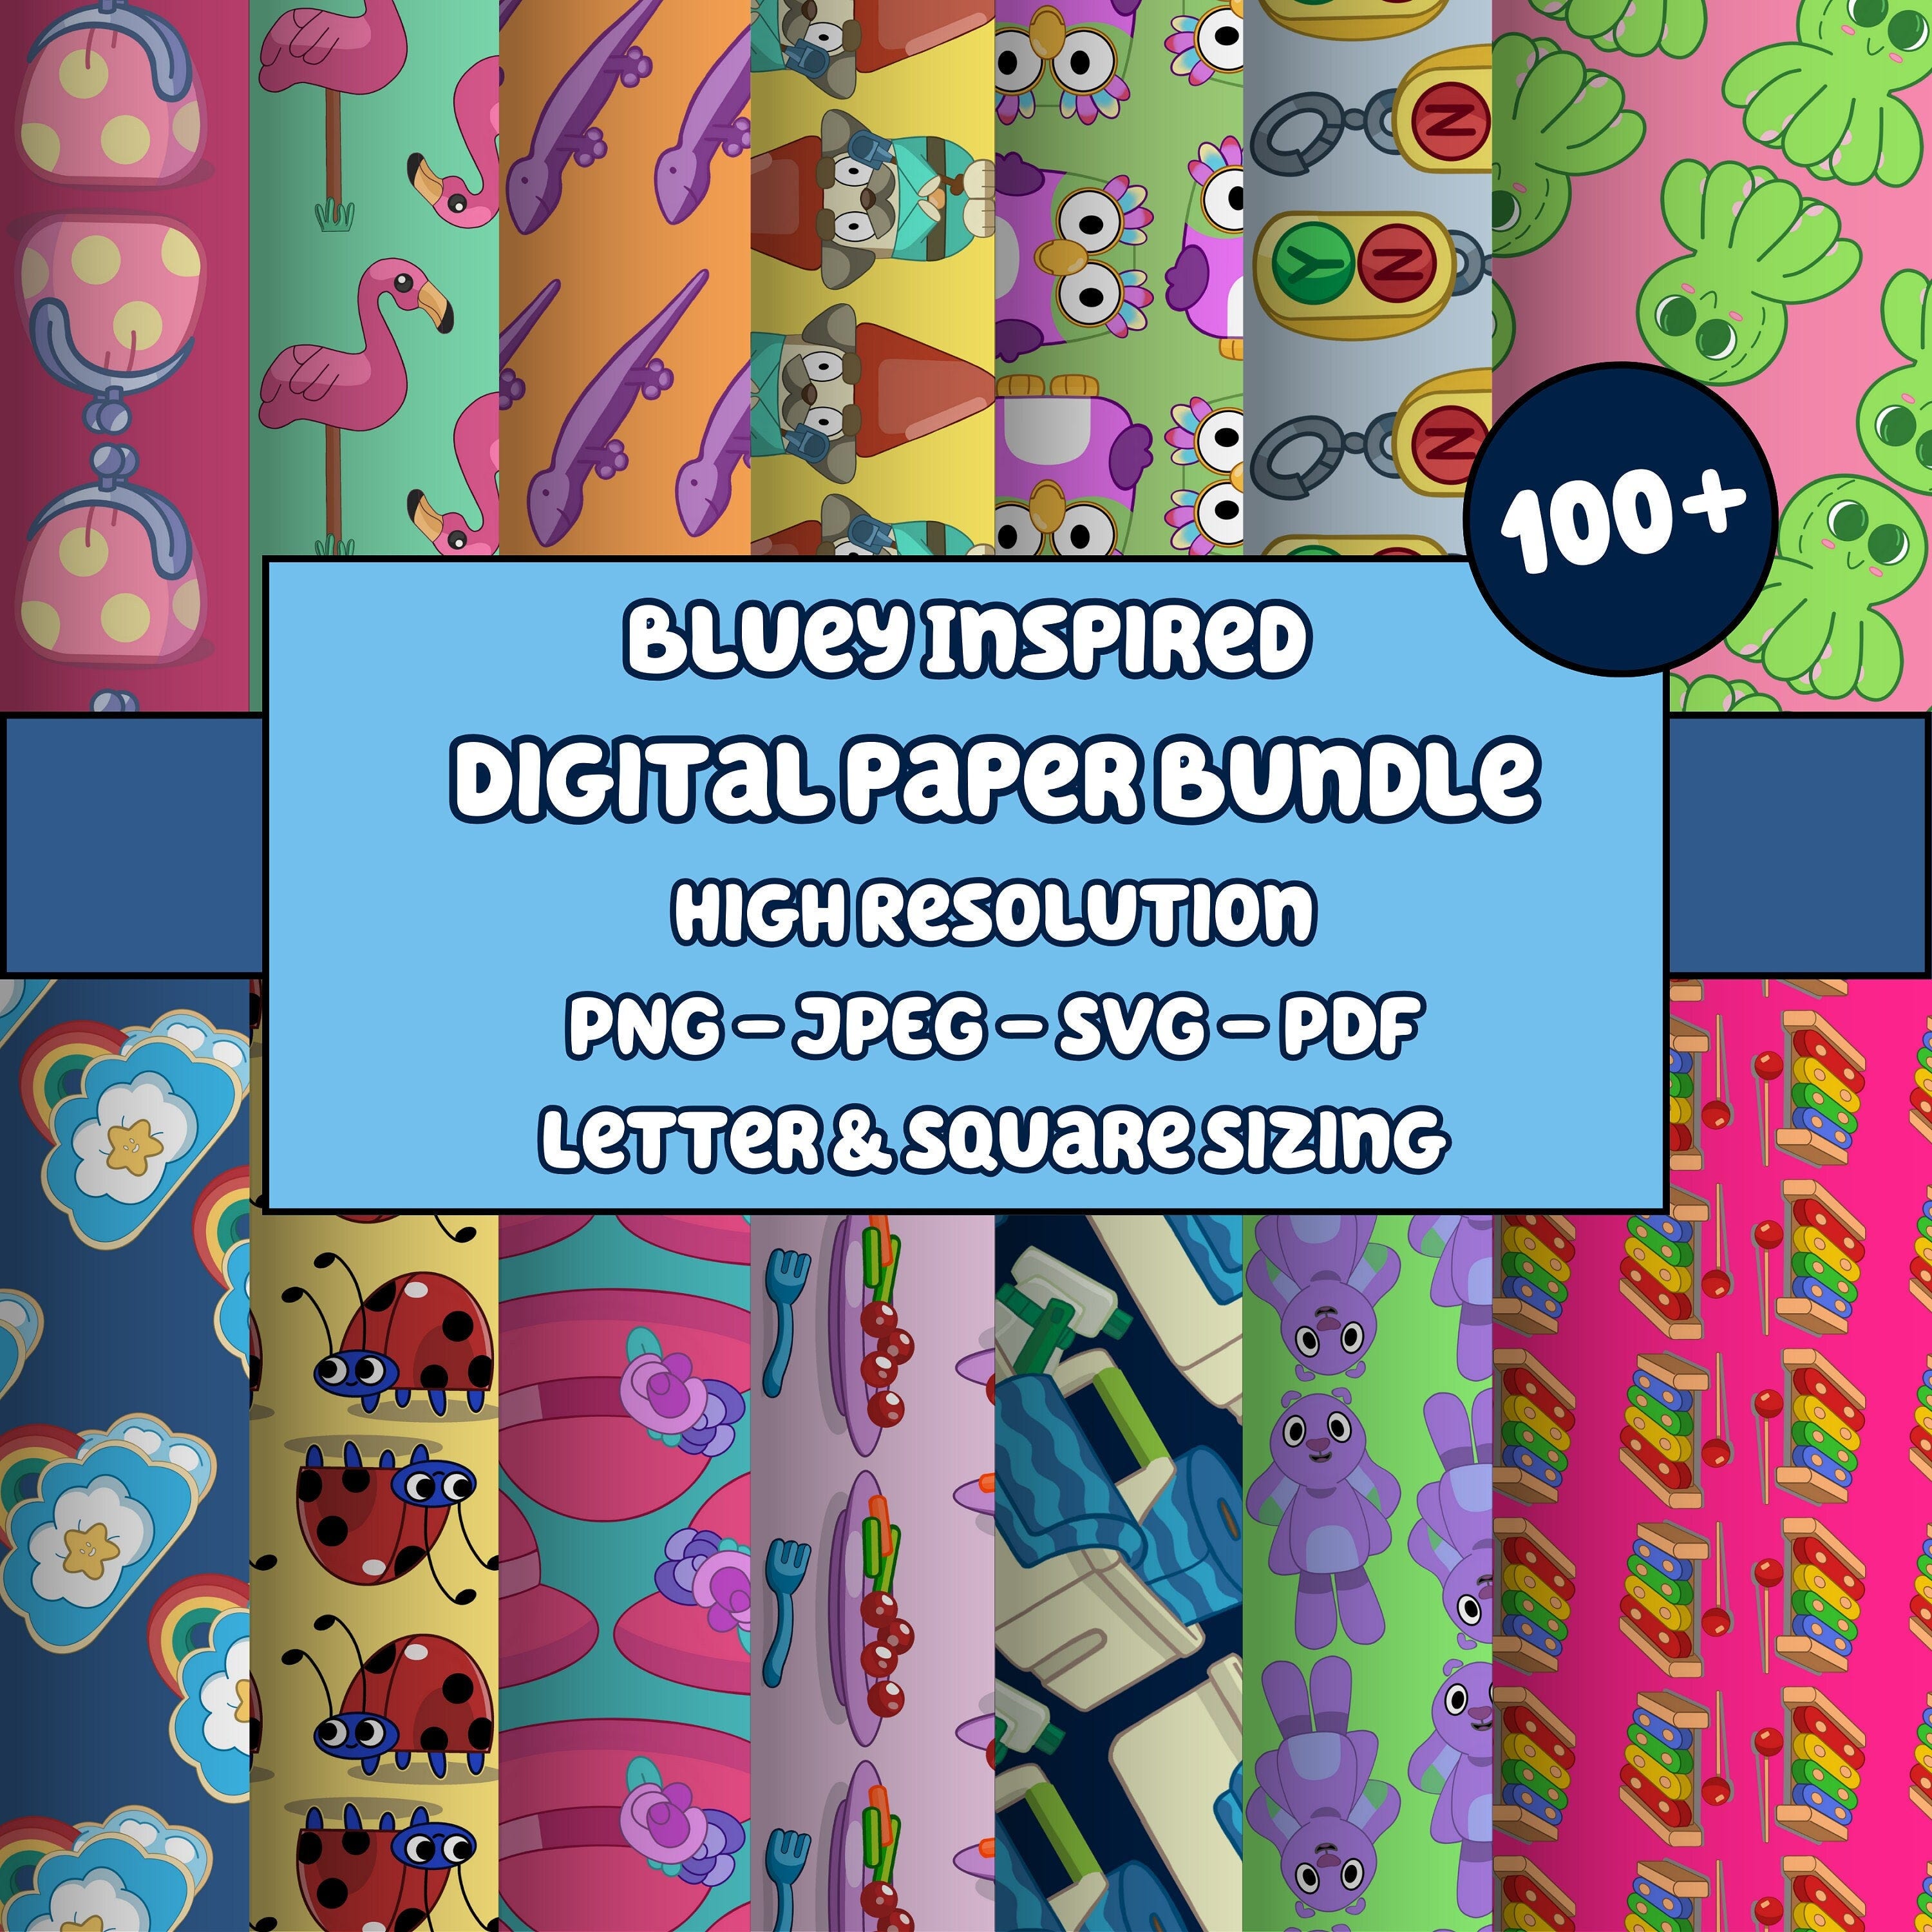 Bluey SVG PNG Jpeg Pdf Digital Paper Bundle- - High Resolution- Bluey SVG for Cricut- Unique Creative Personalized Birthday Gifts